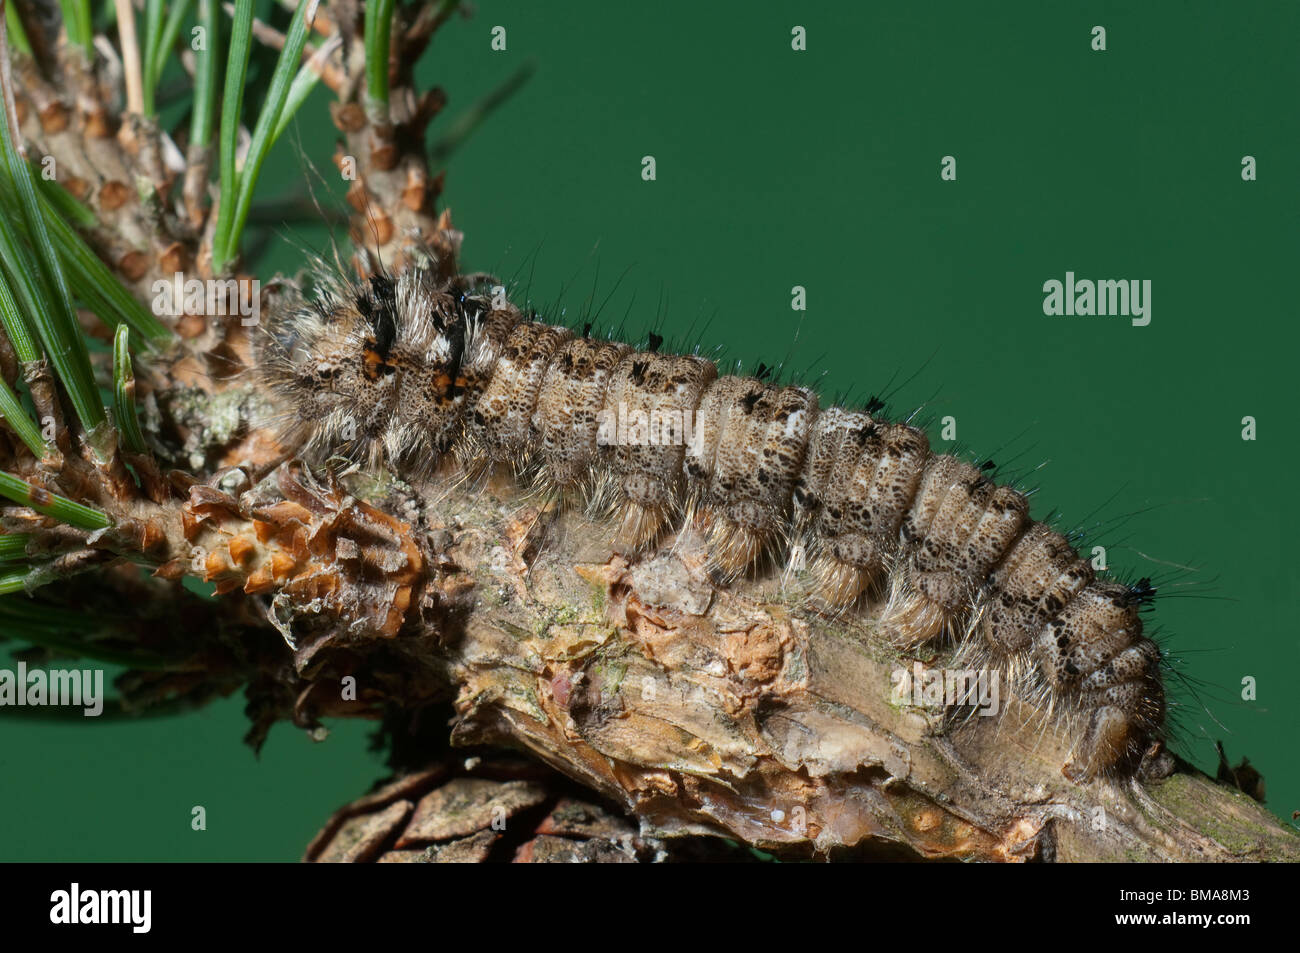 Pine-tree Lappet, Pine Moth (Dendrolimus pini). Caterpillar well camouflaged on a pine twig. Stock Photo